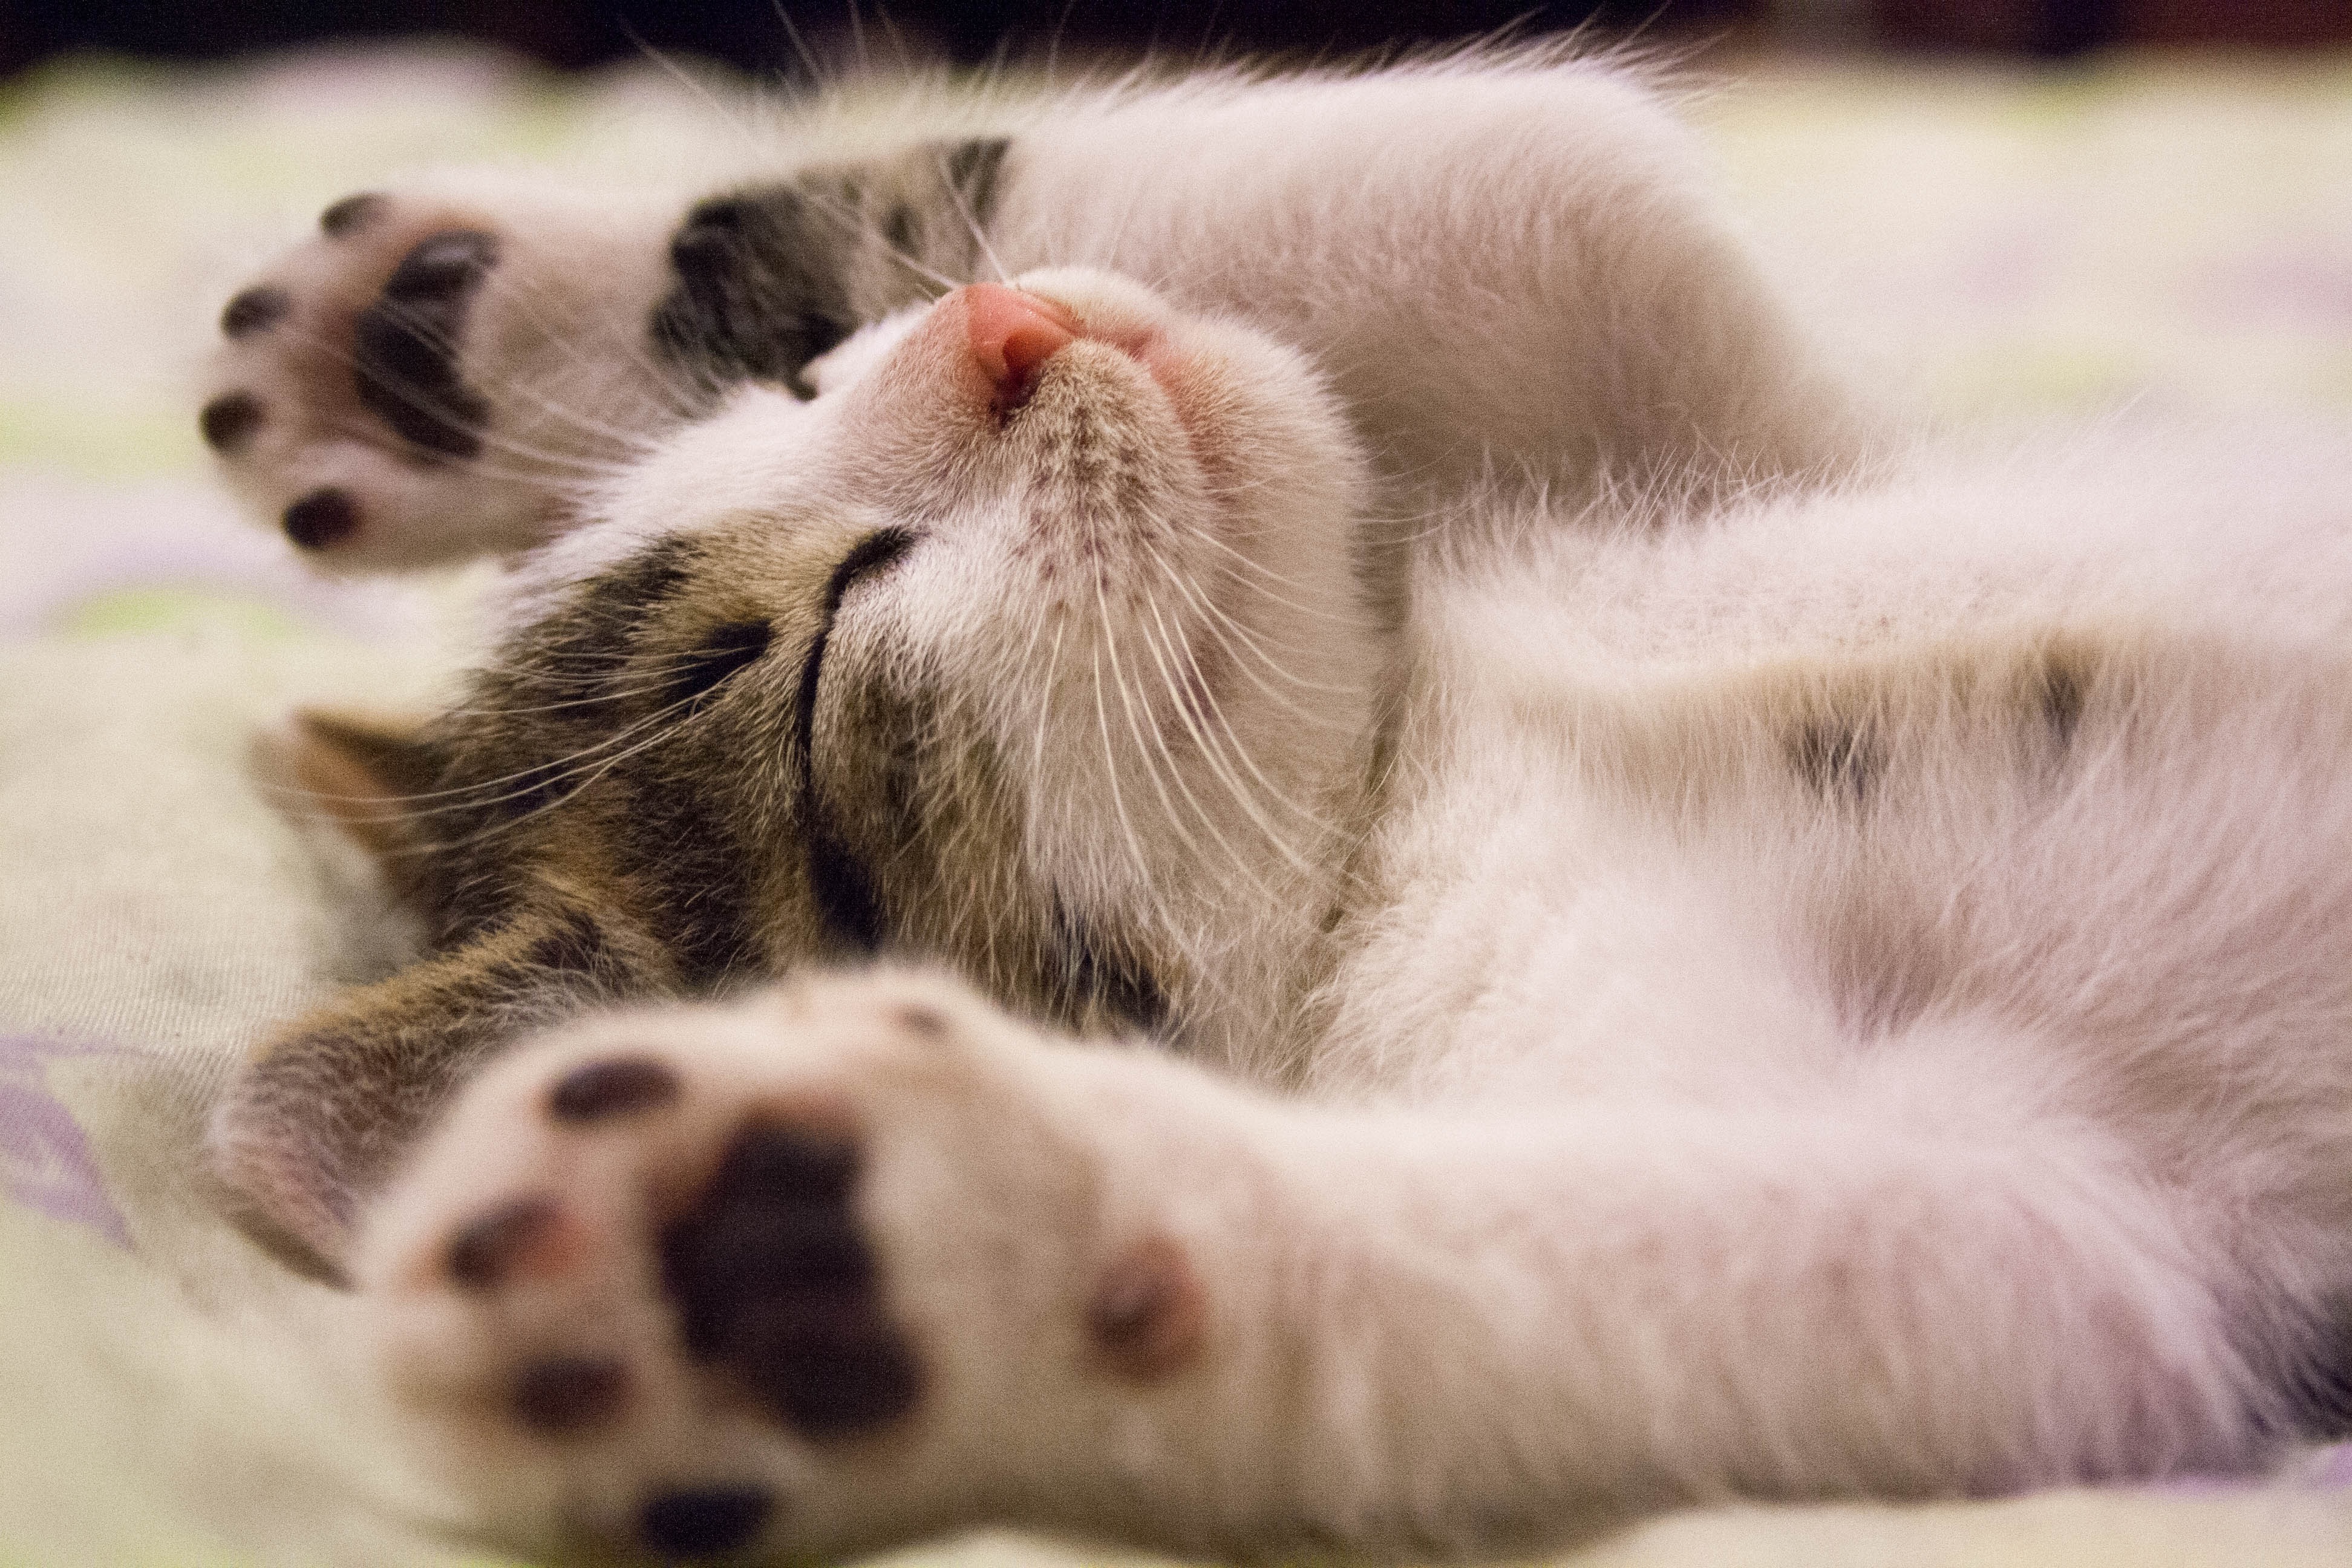 10 signs a cat loves you